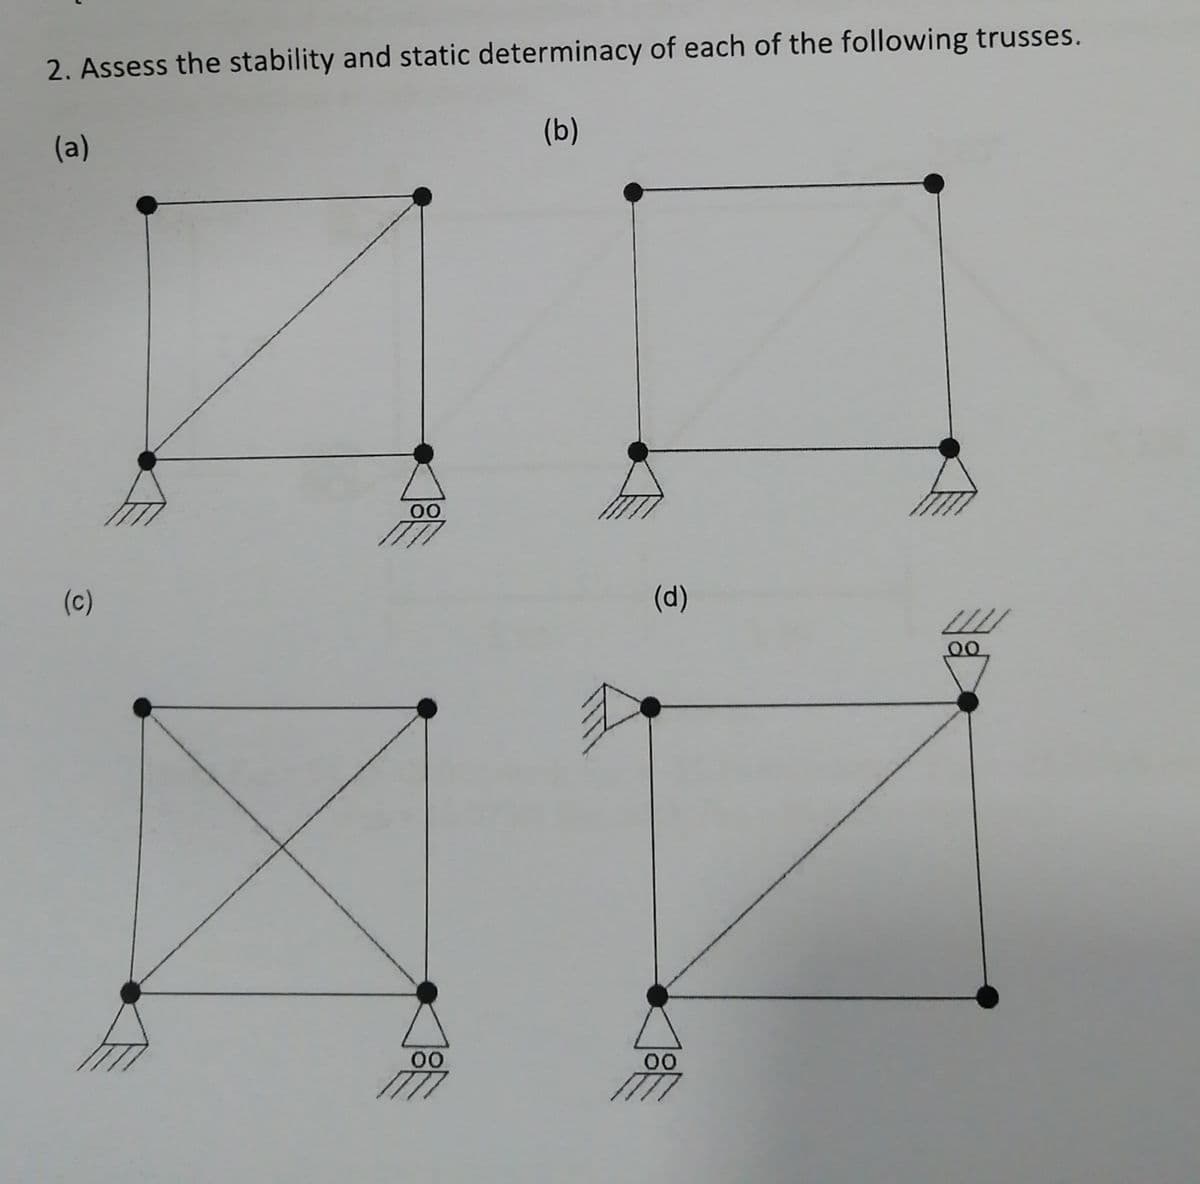 2. Assess the stability and static determinacy of each of the following trusses.
(a)
(b)
00
(c)
(d)
00
00
